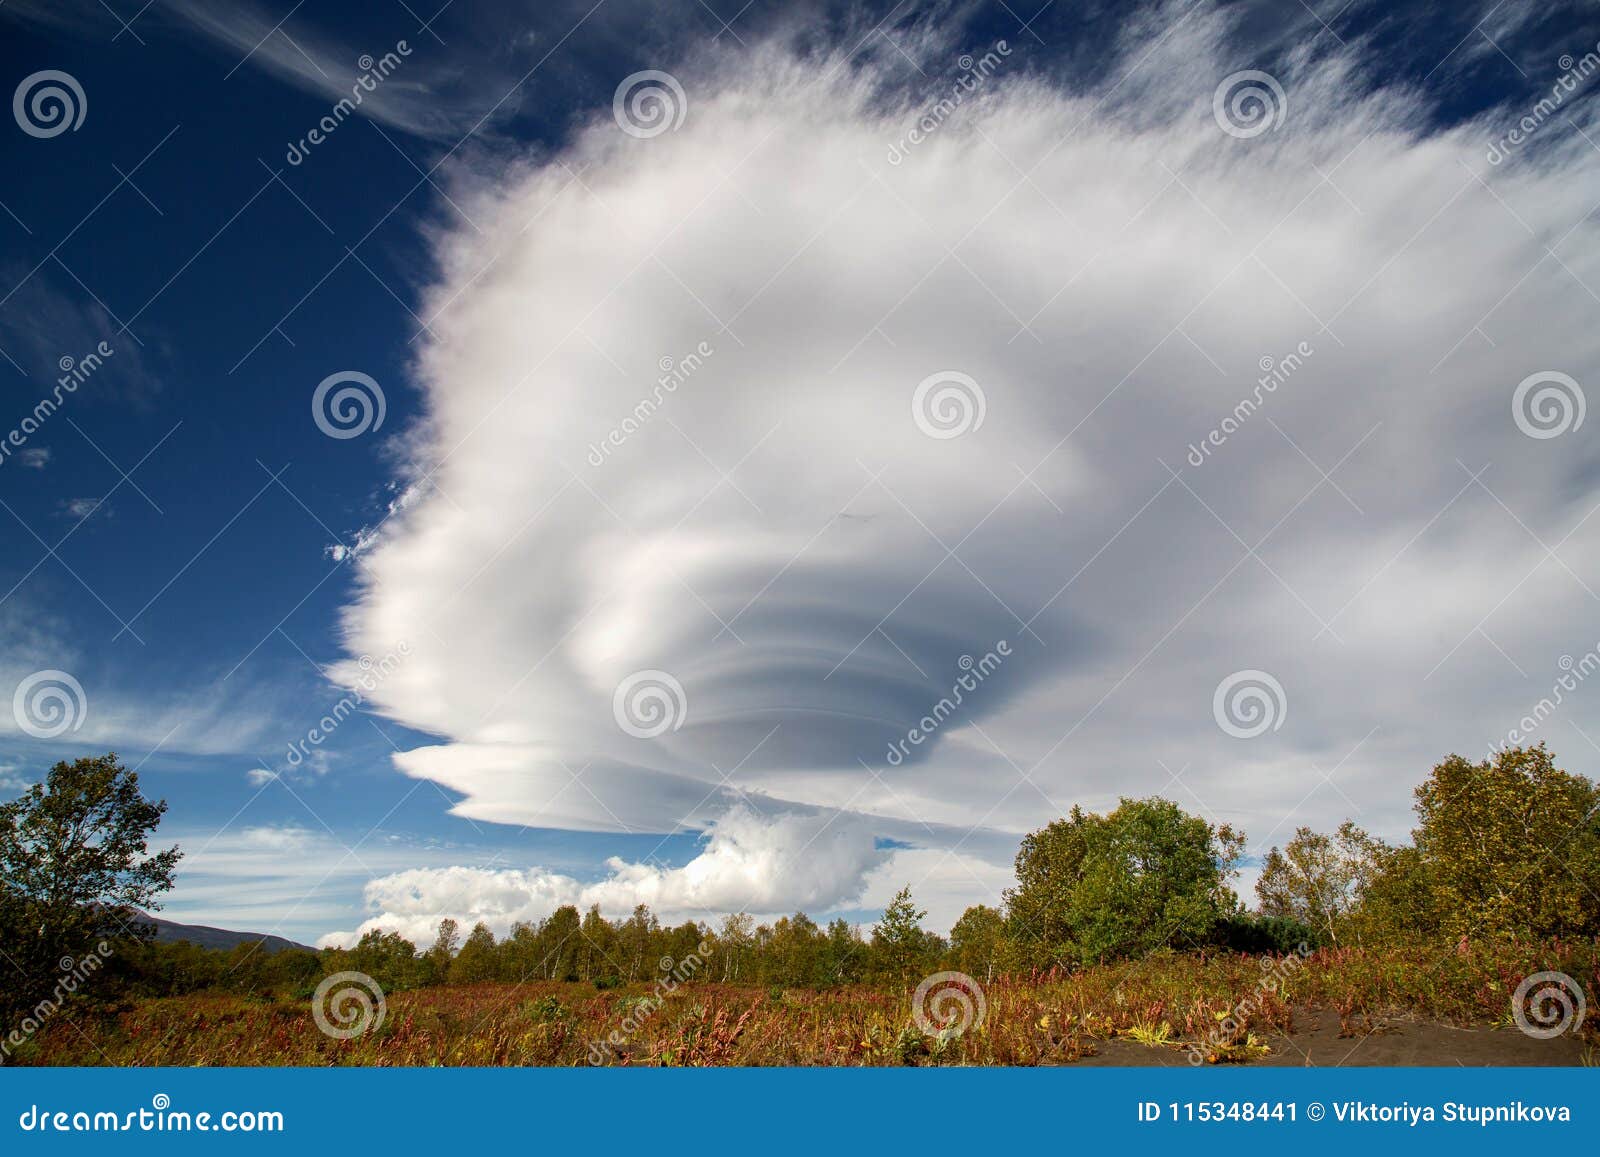 Rare Lenticular Photos Free Royalty Free Stock Photos From Dreamstime